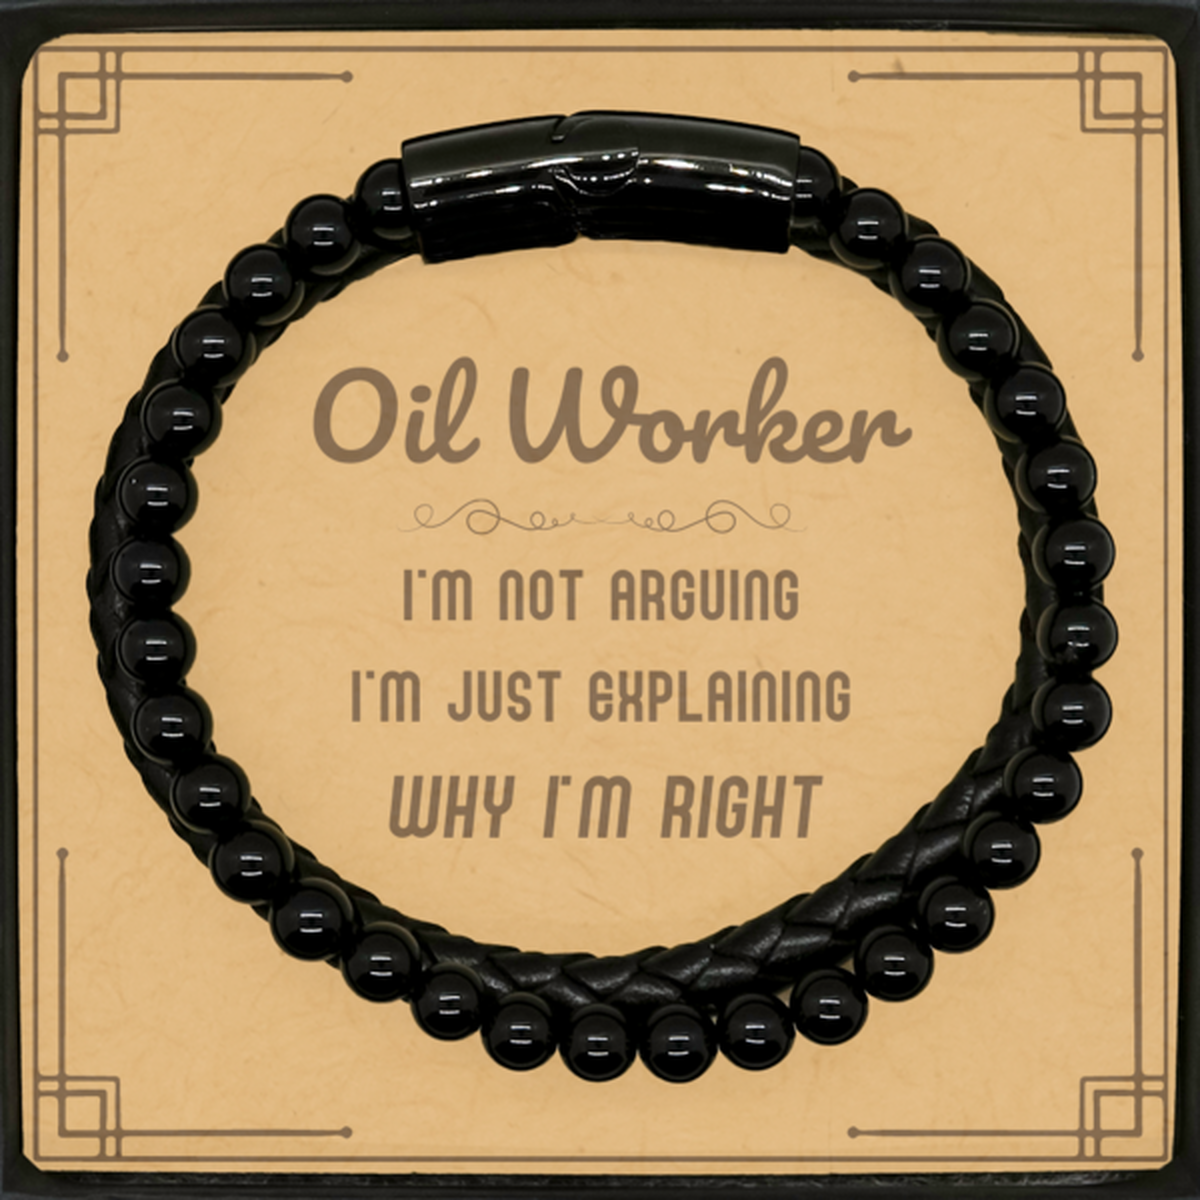 Oil Worker I'm not Arguing. I'm Just Explaining Why I'm RIGHT Stone Leather Bracelets, Funny Saying Quote Oil Worker Gifts For Oil Worker Message Card Graduation Birthday Christmas Gifts for Men Women Coworker